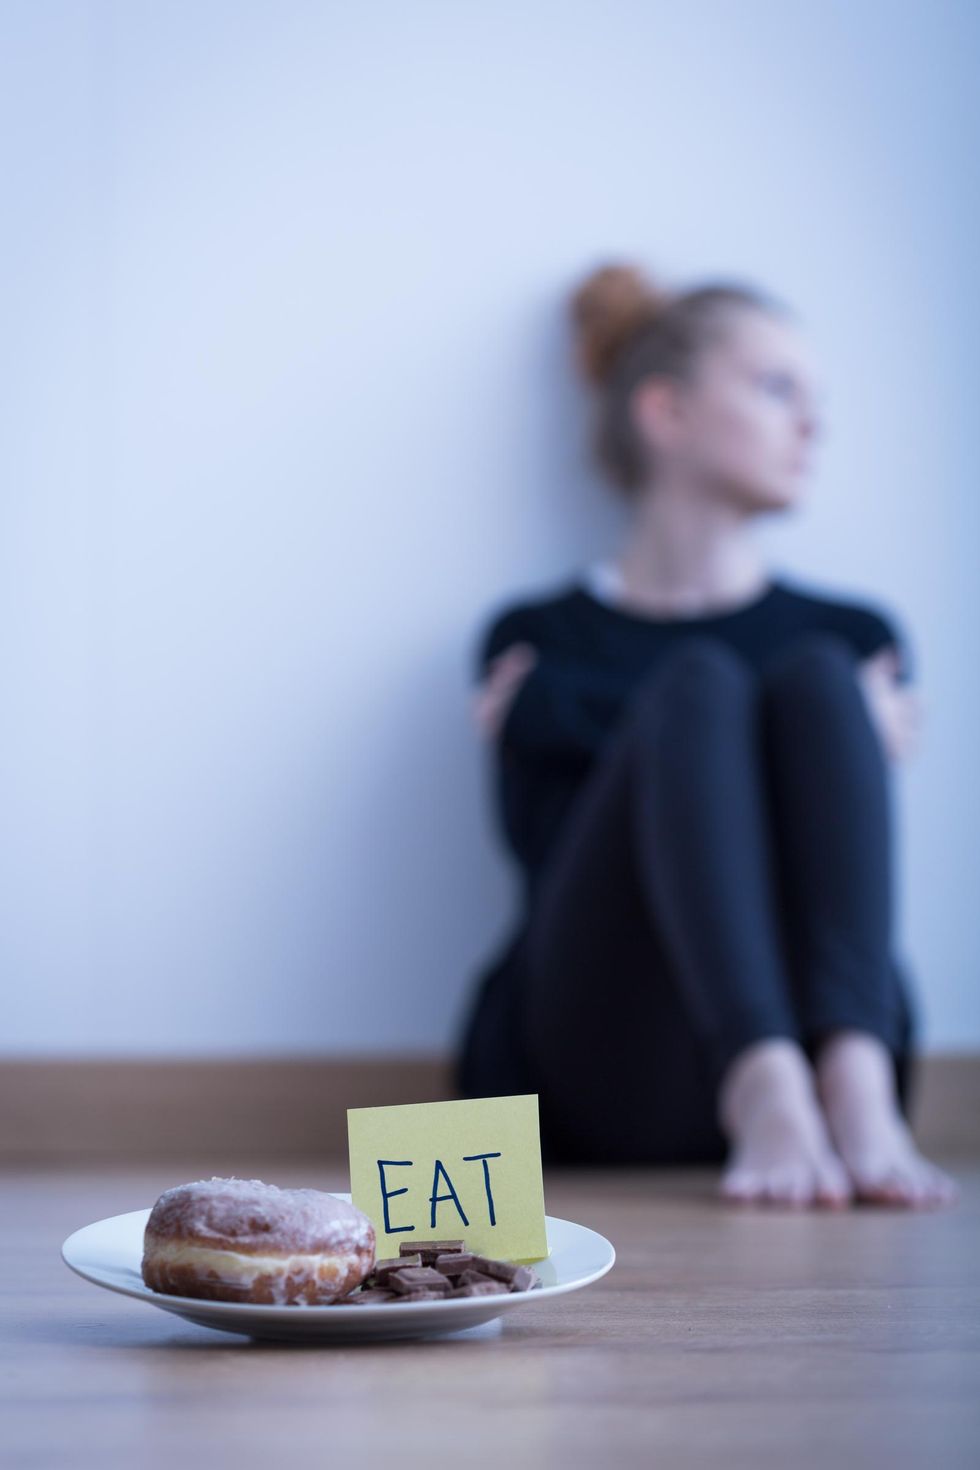 10 Things People With Eating Disorders Wish Others Understood